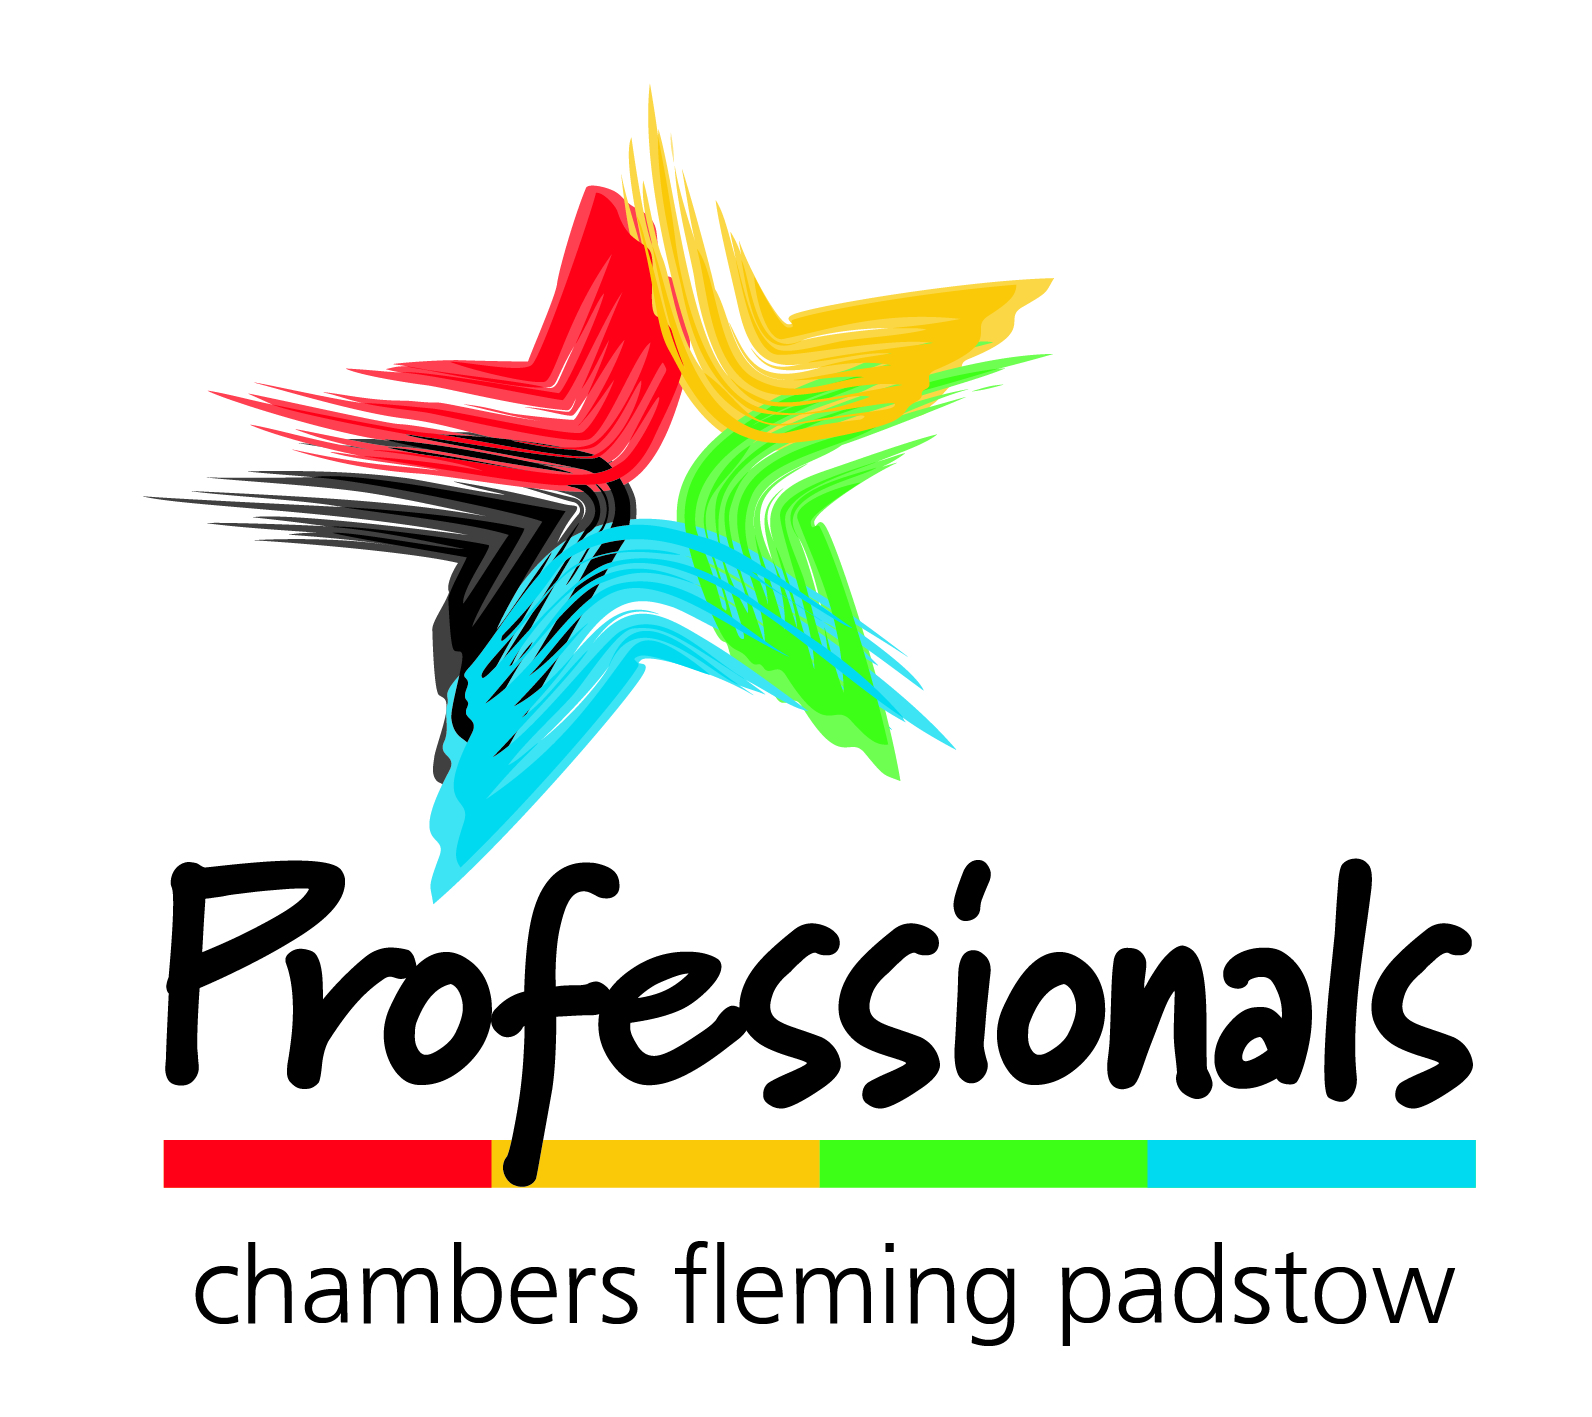 Chambers Fleming Professionals